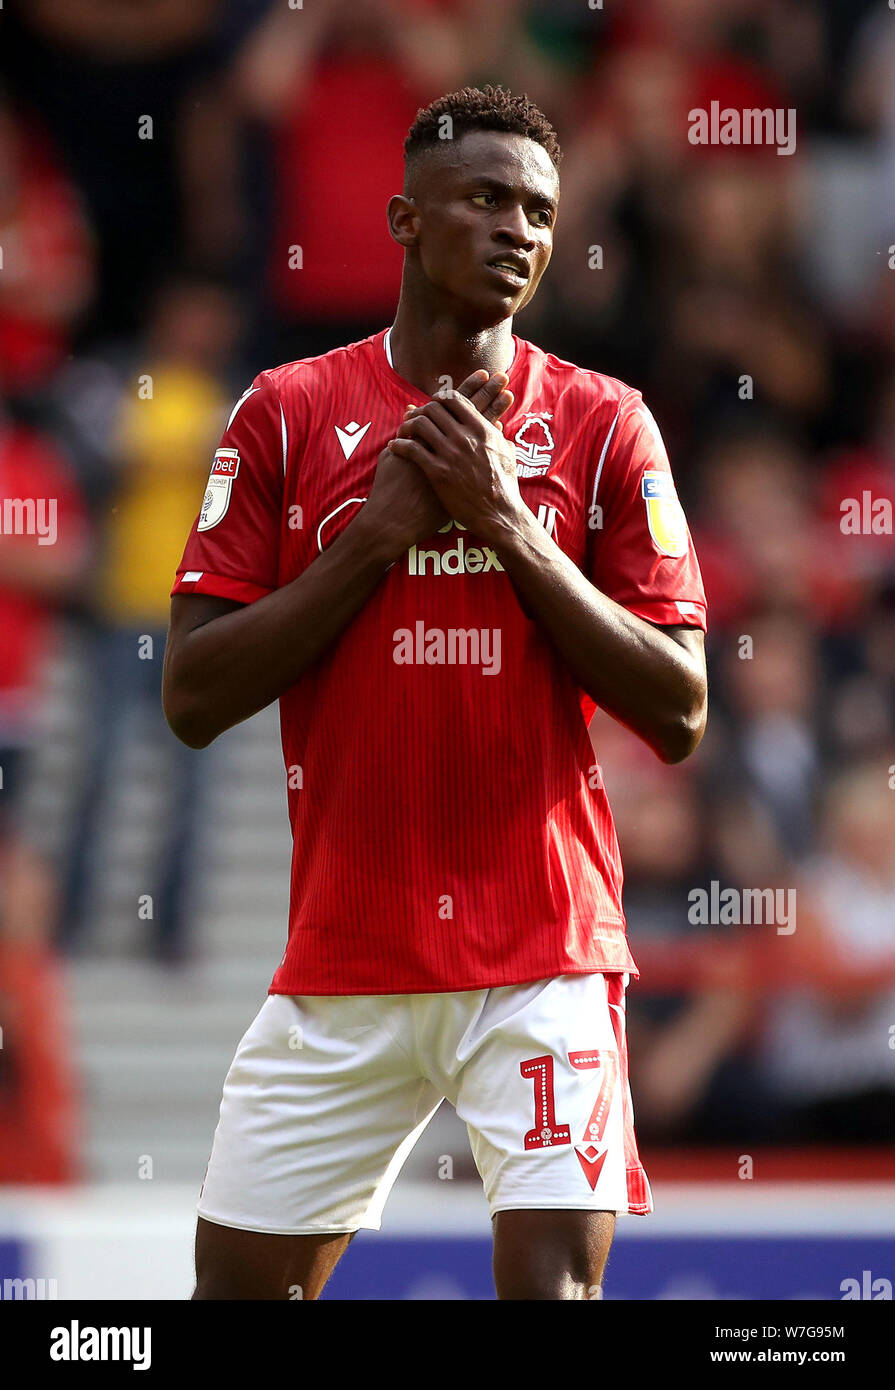 Nottingham Forest's Alfa Semedo during the Sky Bet Championship match at the City Ground, Nottingham. PRESS ASSOCIATION Photo. Picture date: Saturday August 3, 2019. Photo credit should read: Tim Goode/PA Wire. RESTRICTIONS: No use with unauthorised audio, video, data, fixture lists, club/league logos or 'live' services. Online in-match use limited to 120 images, no video emulation. No use in betting, games or single club/league/player publications. Stock Photo